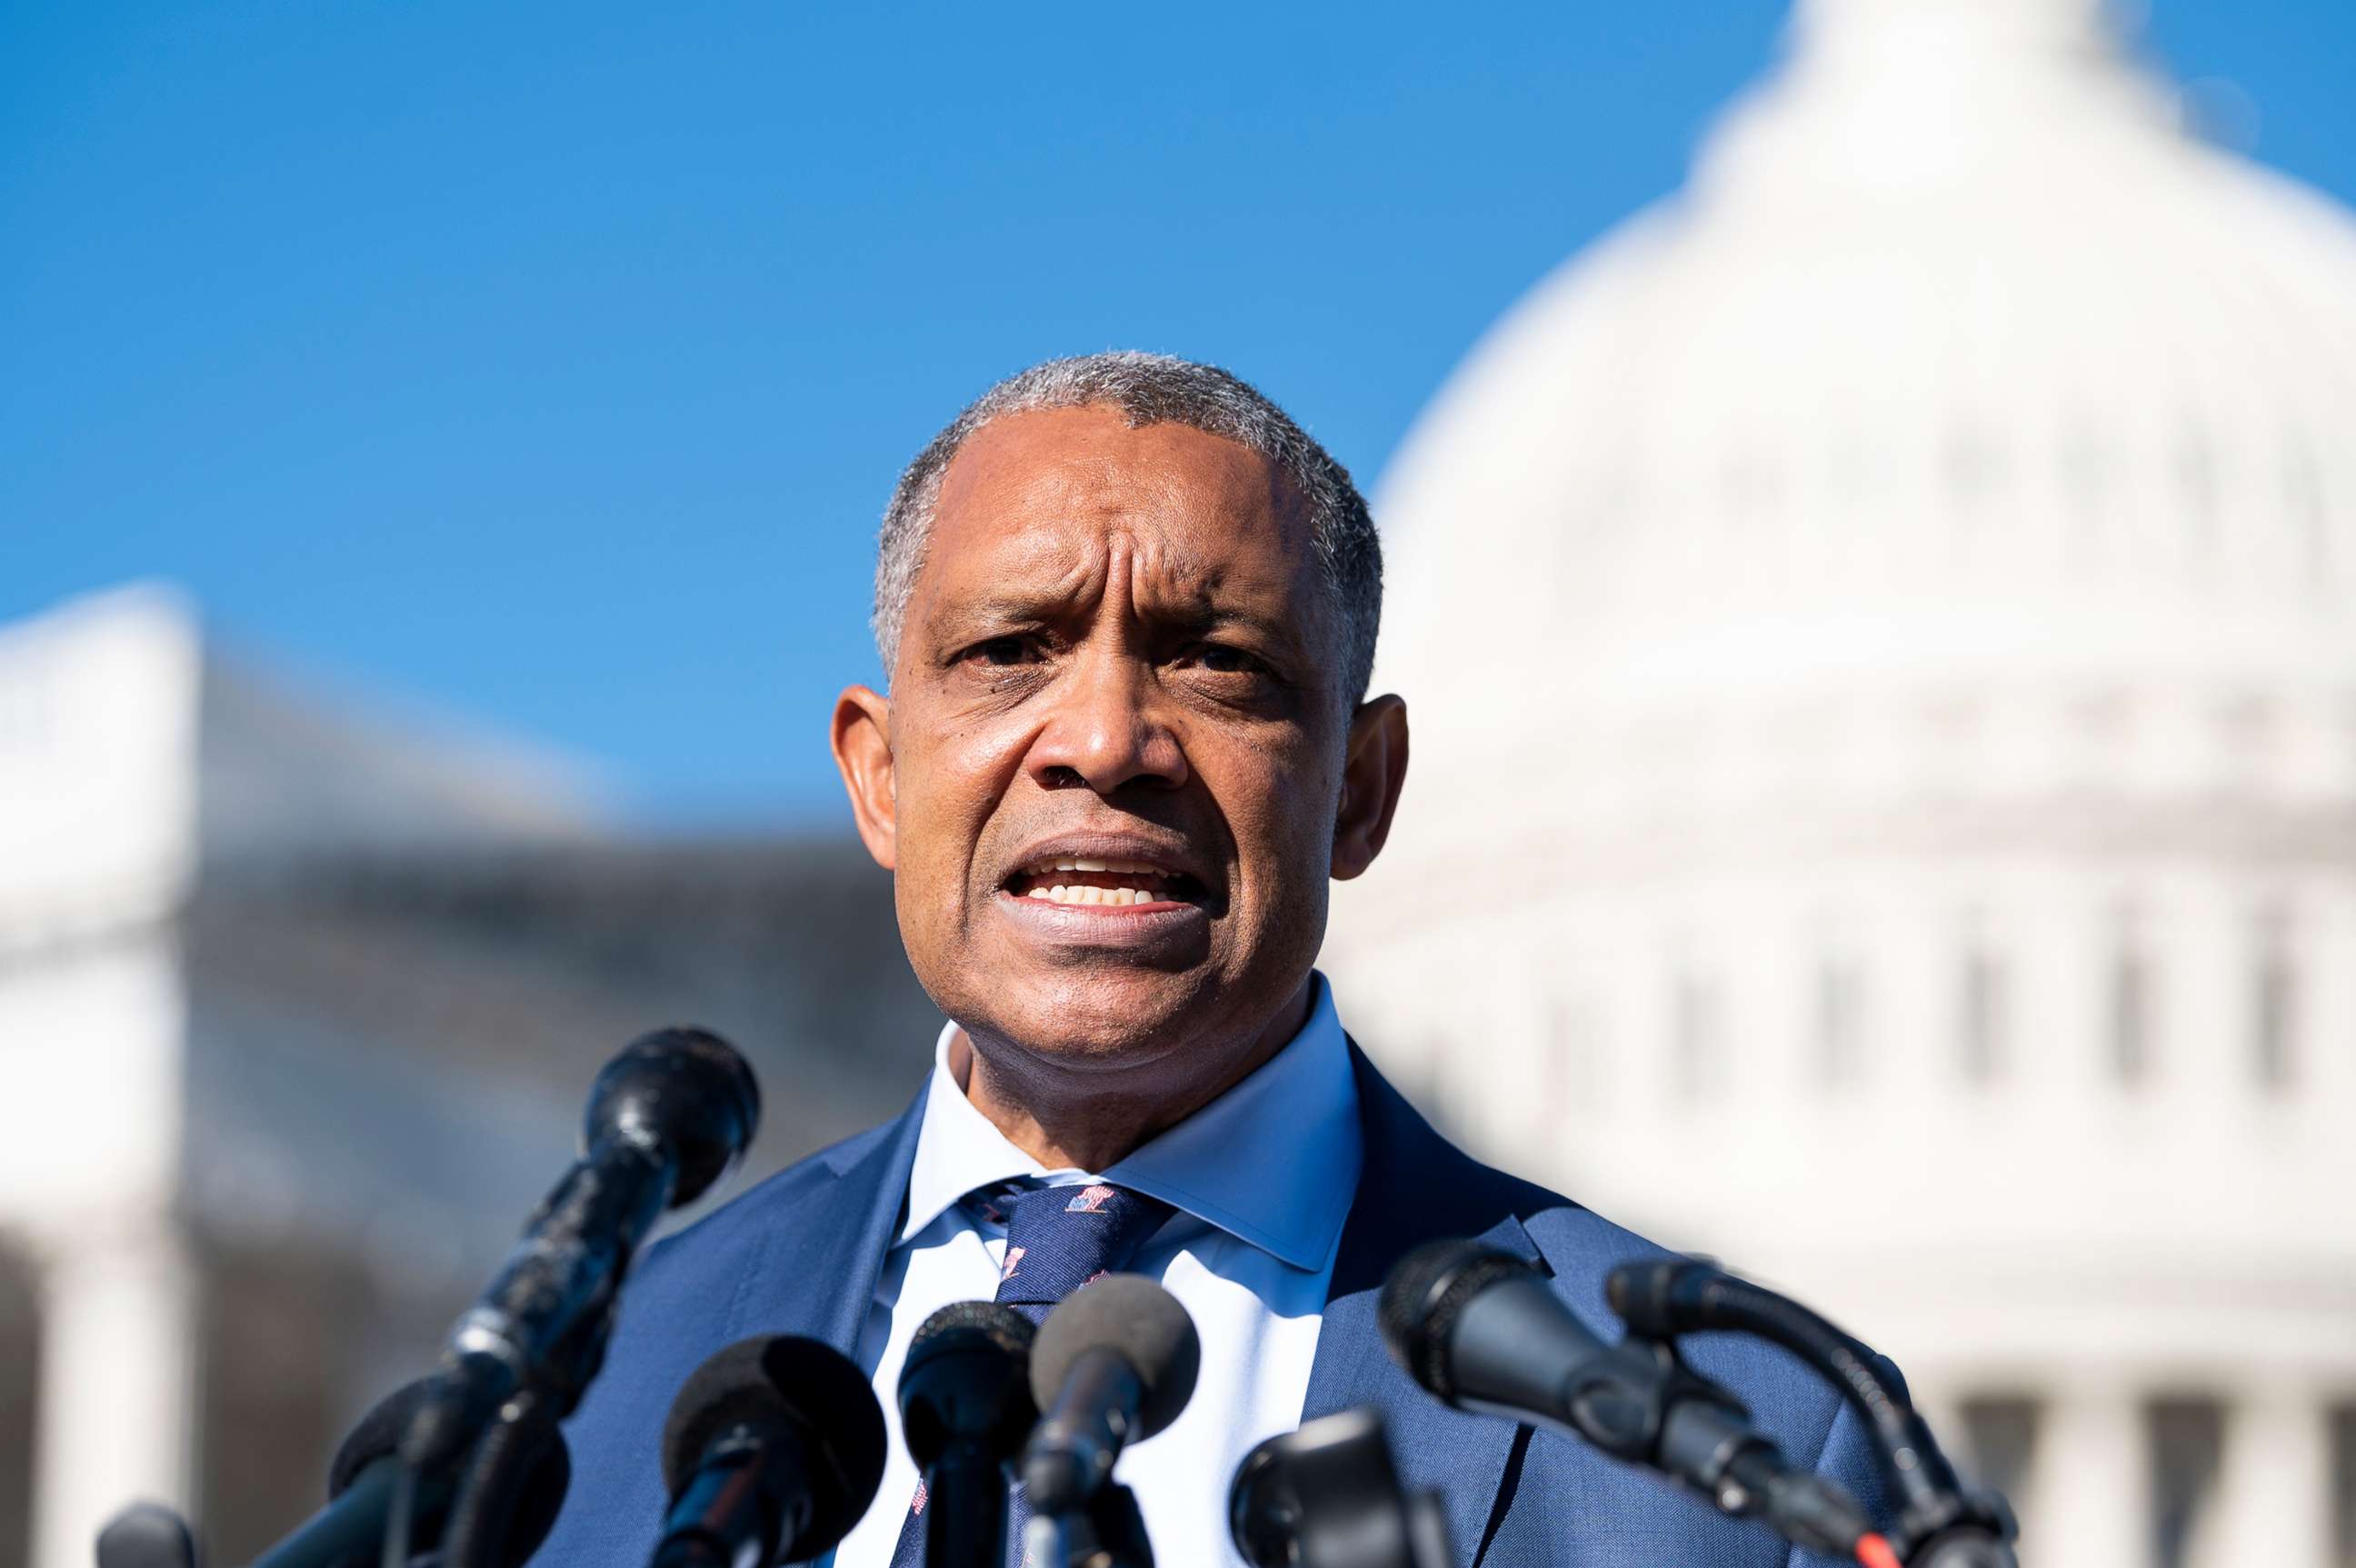 PHOTO: D.C. Attorney General Karl Racine speaks during a news conference outside the U.S. Capitol, Dec. 14, 2021.